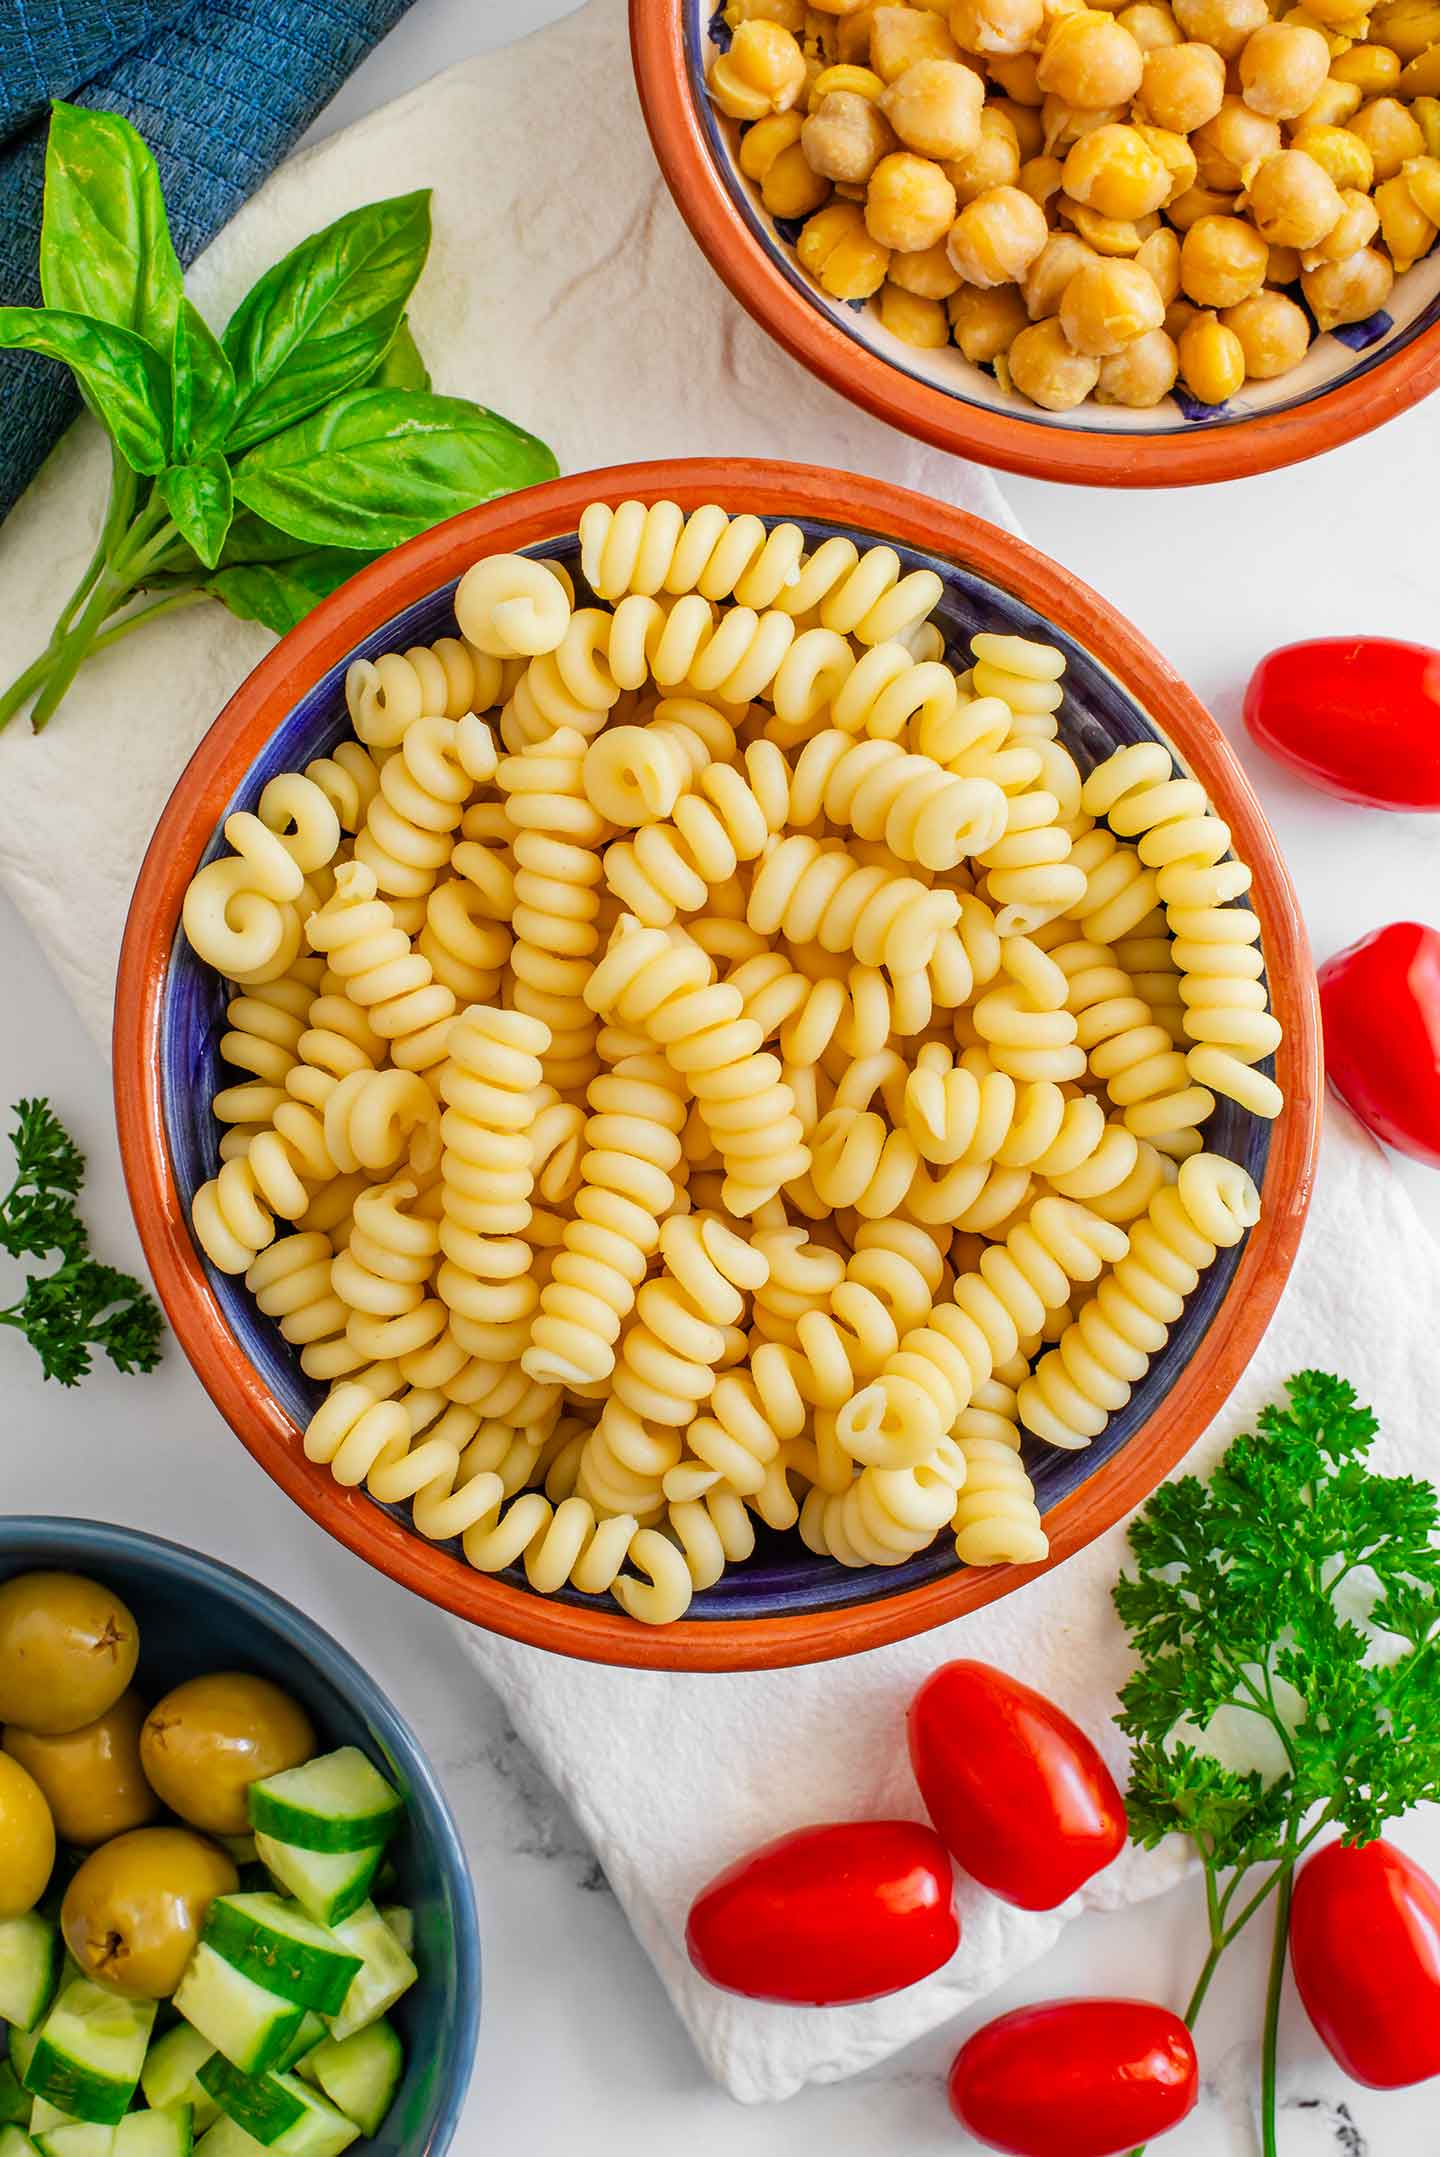 Top down view of ingredients for pasta salad in a jar. Fusilli pasta, olives, grape tomatoes, chopped cucumber and fresh herbs rest on a tray.